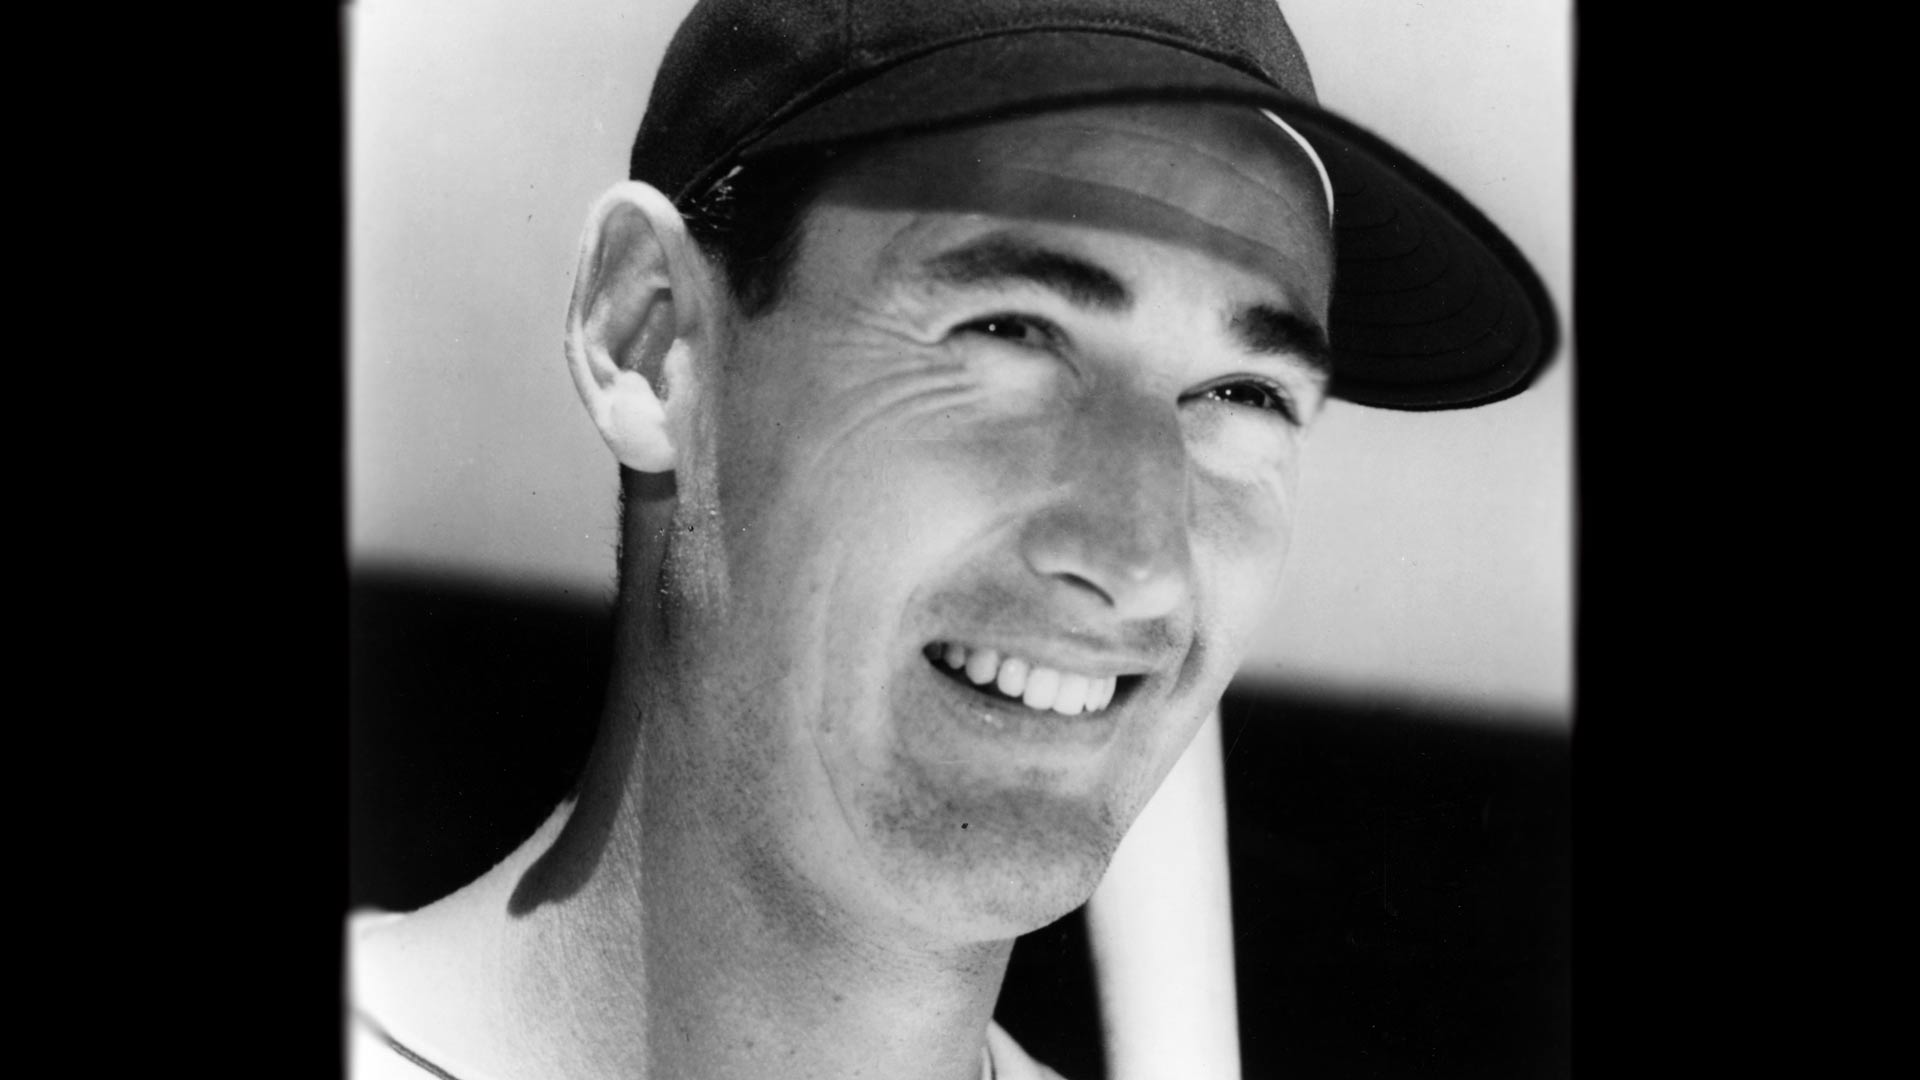 Ted Williams, American Experience, Official Site